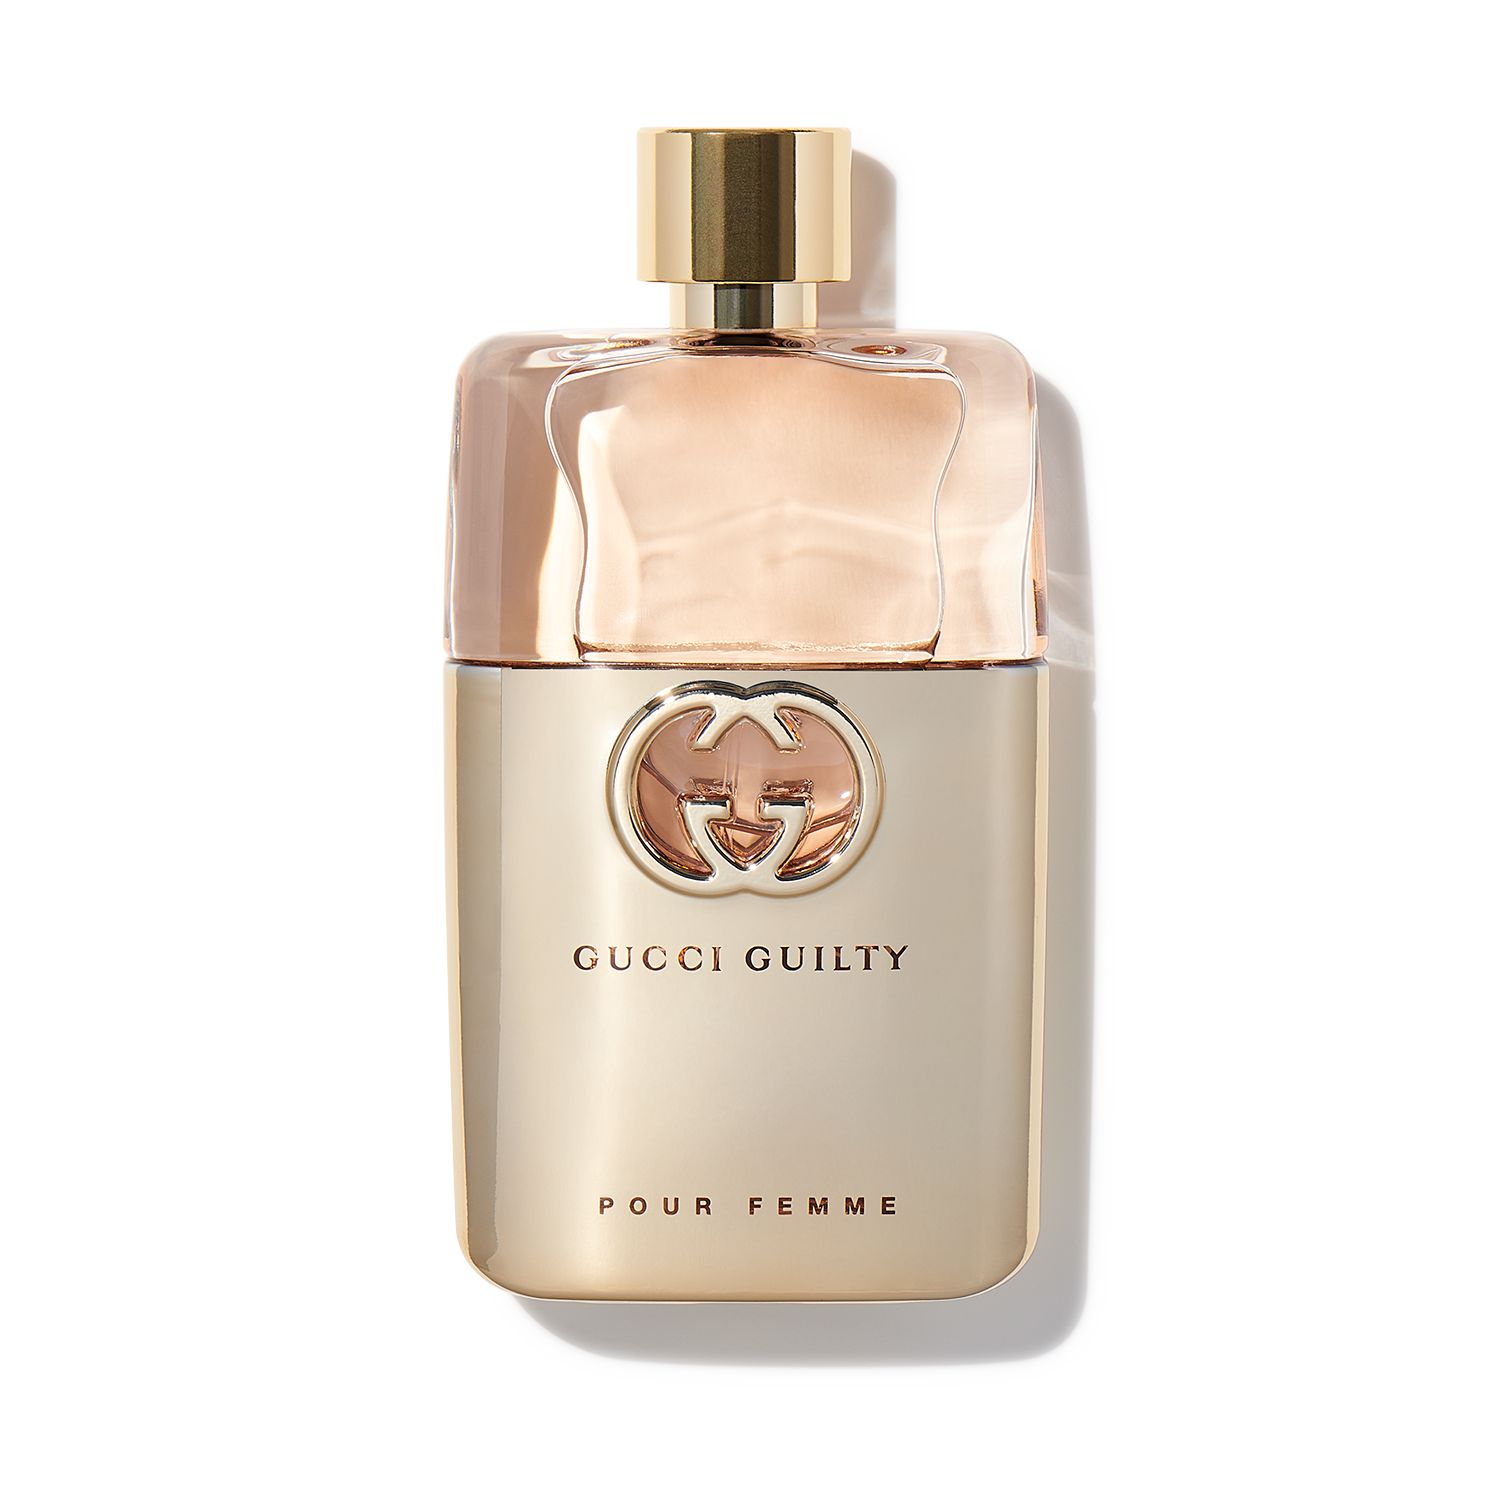 Shop for samples of Guilty Pour Femme (Eau de Parfum) by Gucci for women  rebottled and repacked by